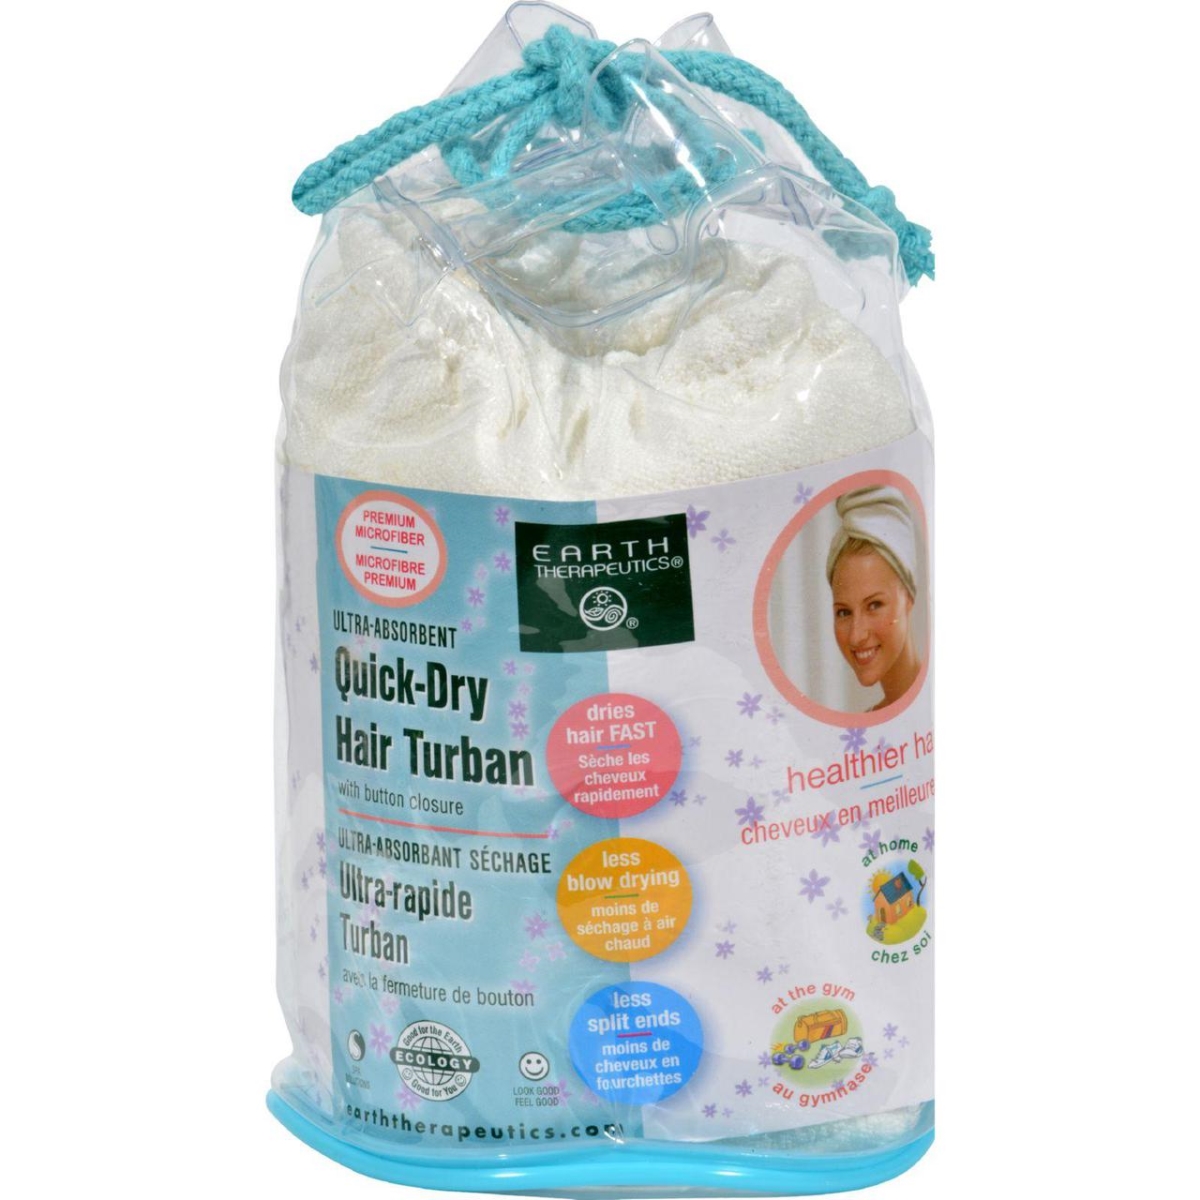 Hg0857185 Quick Dry Hair Turban Ultra-absorbent